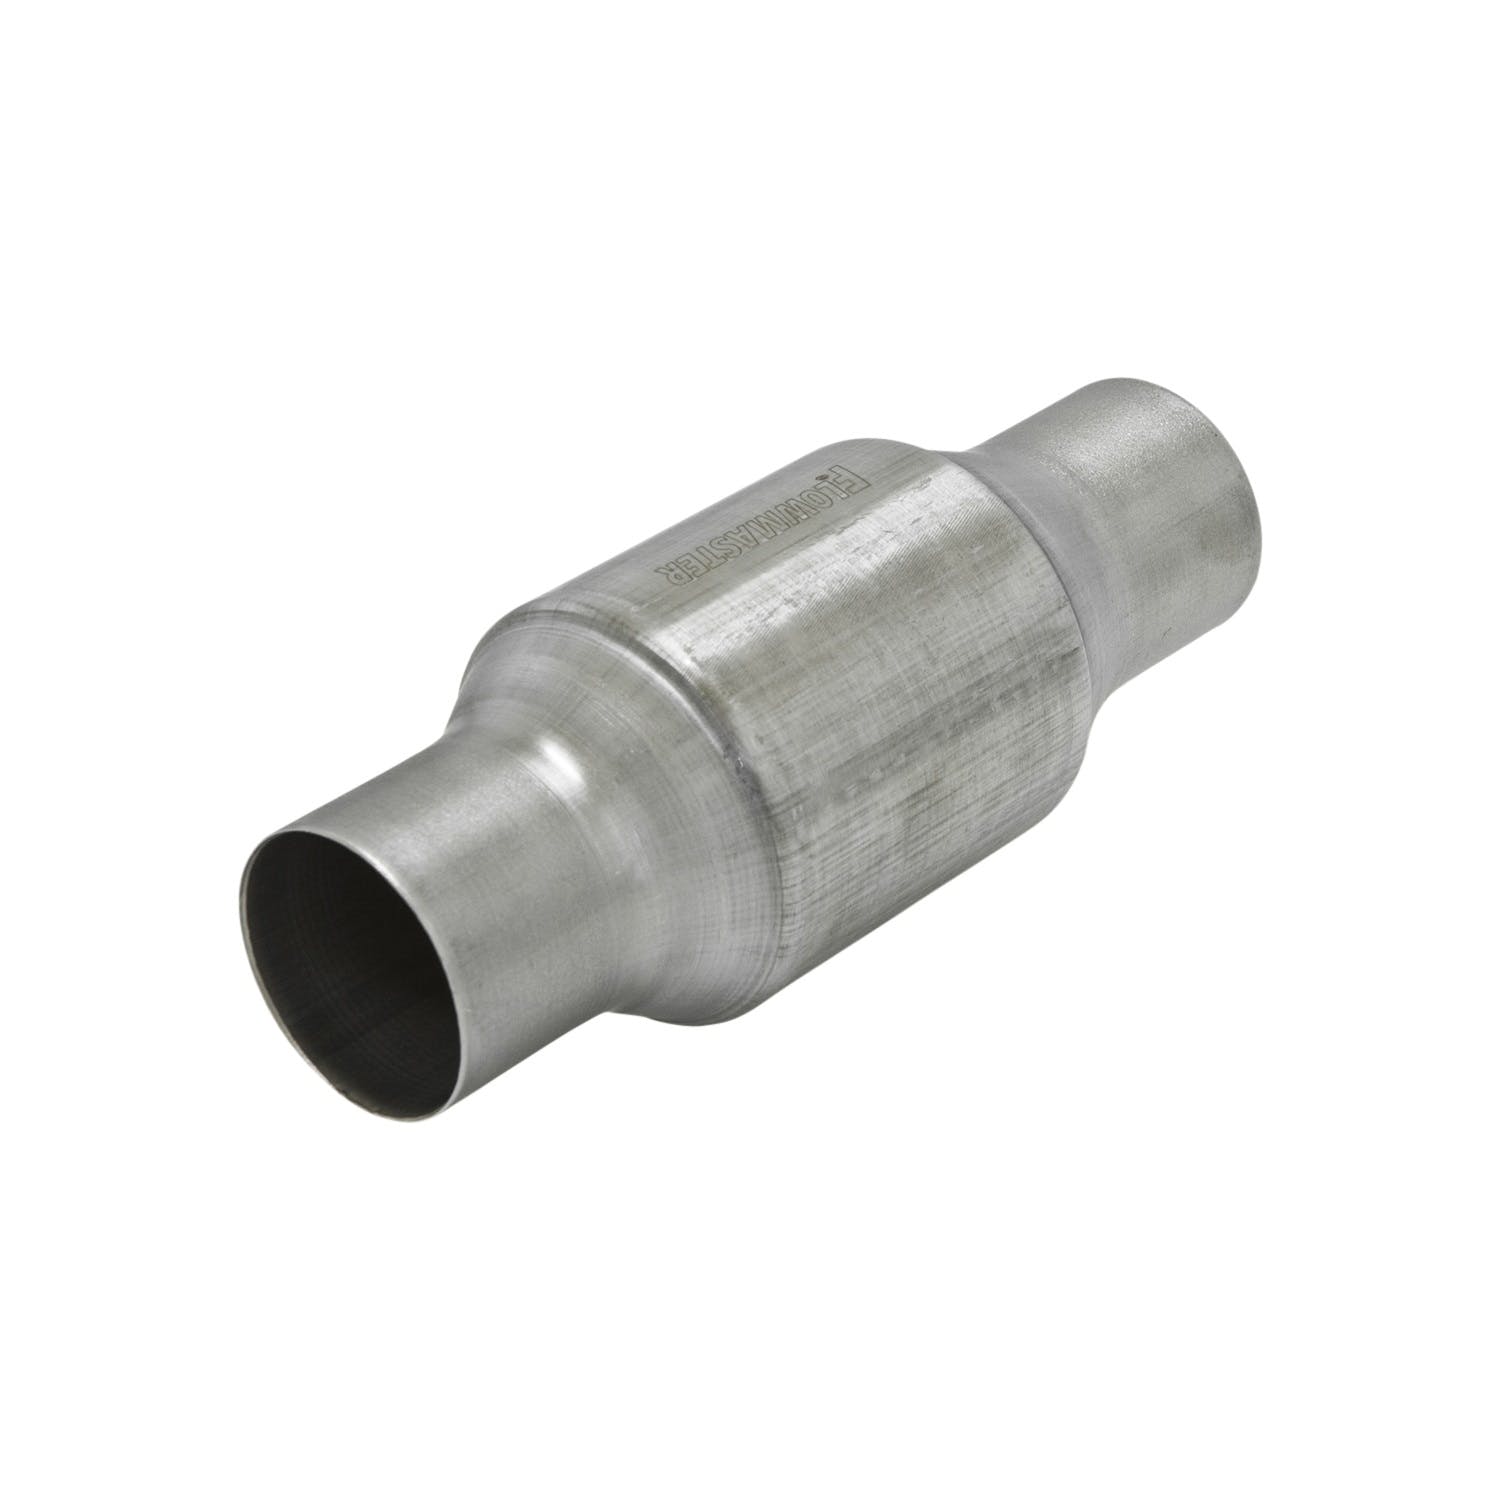 Flowmaster Catalytic Converters 2230124 Catalytic Converter-Universal-223 Series-2.25 in. Inlet/Outlet-49 State